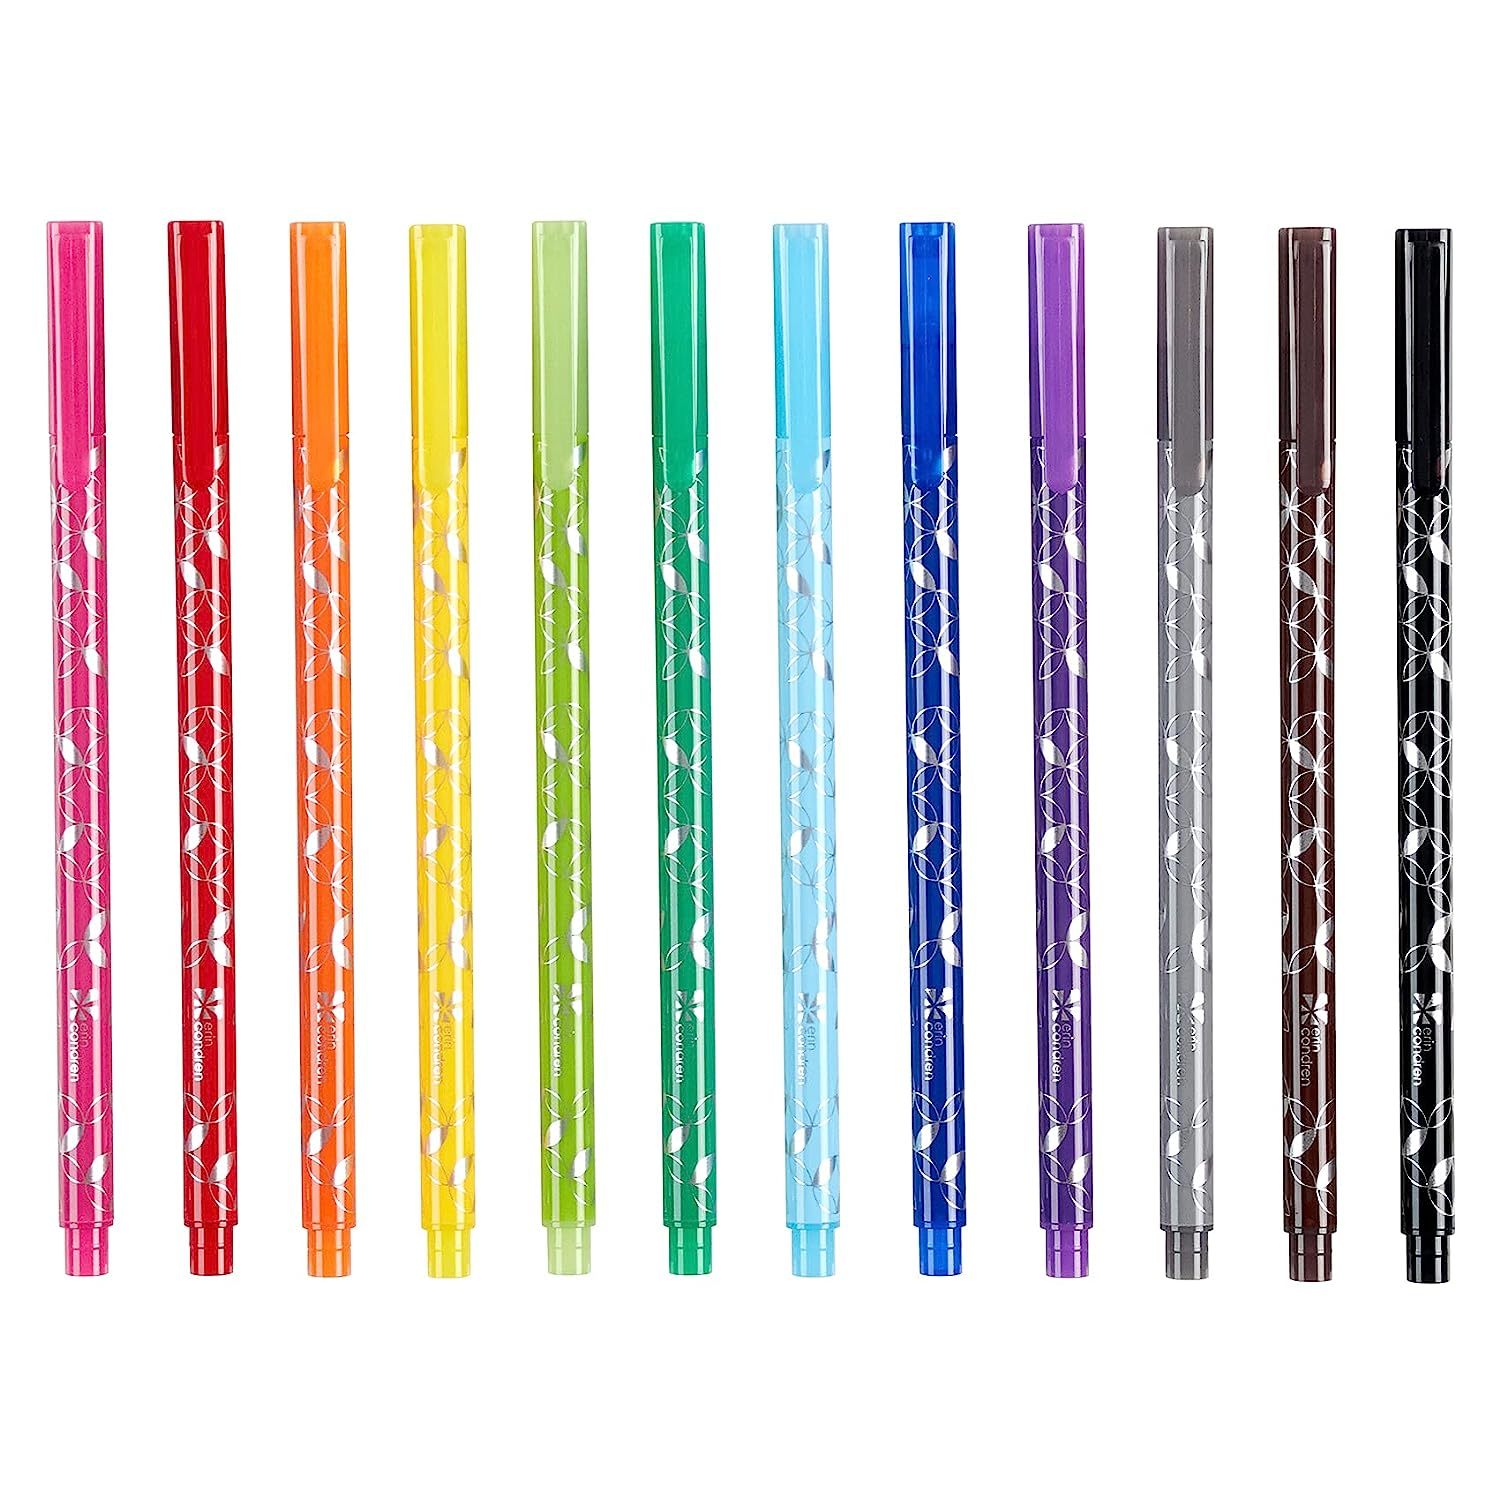 Erin Condren Colorful Ultra Fine Tip Markers 12-Pack. 12 Rich and Bold  Colors. Water-Based Ink Markers. 0.5mm Fine Tip Great for Detailing and  Drawing